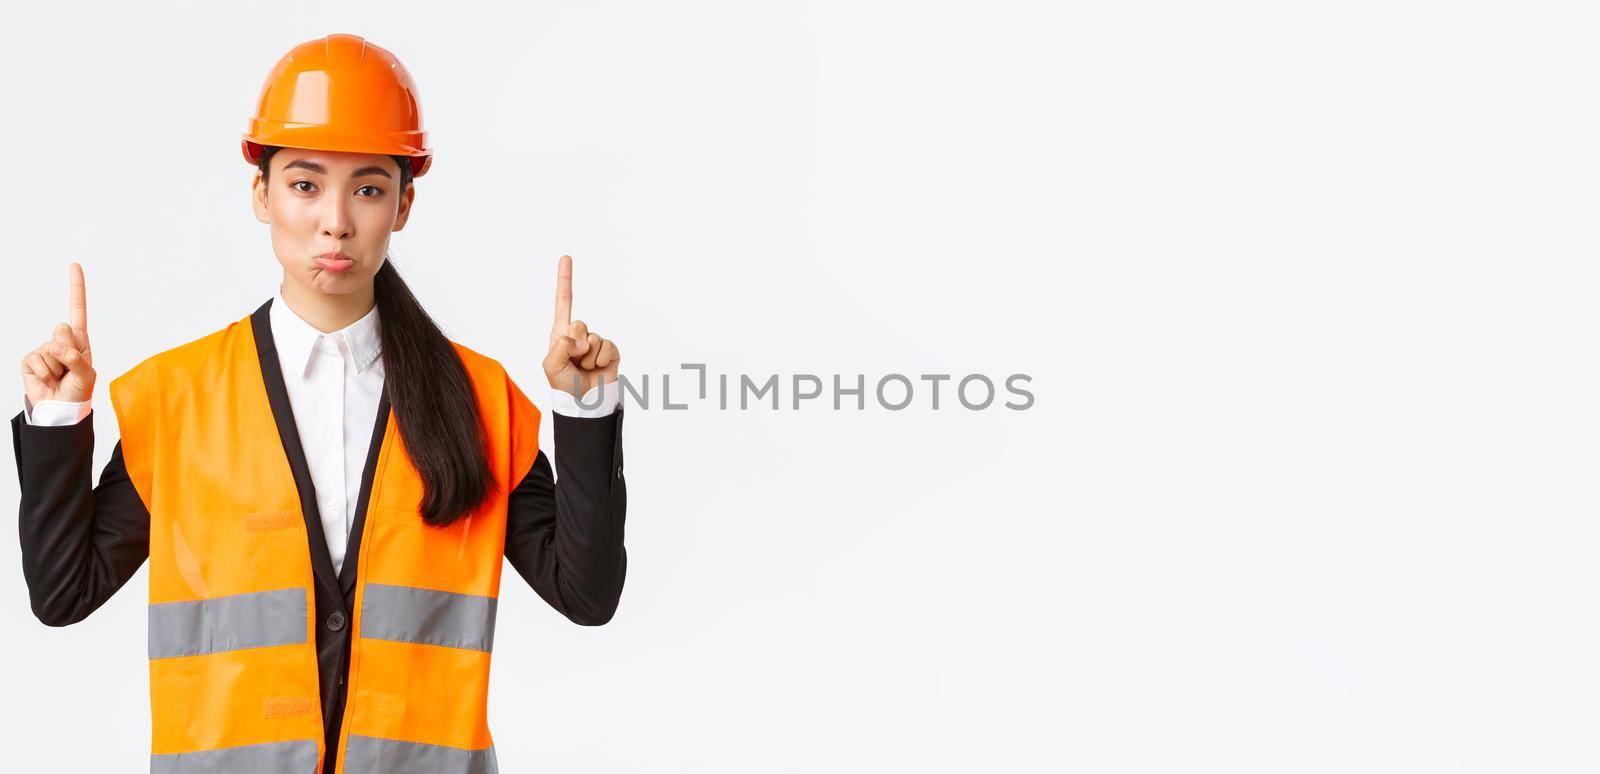 Building, construction and industrial concept. Displeased sad asian female architect complaining, wearing safety helmet and reflective clothing, pouting upset as pointing fingers up.